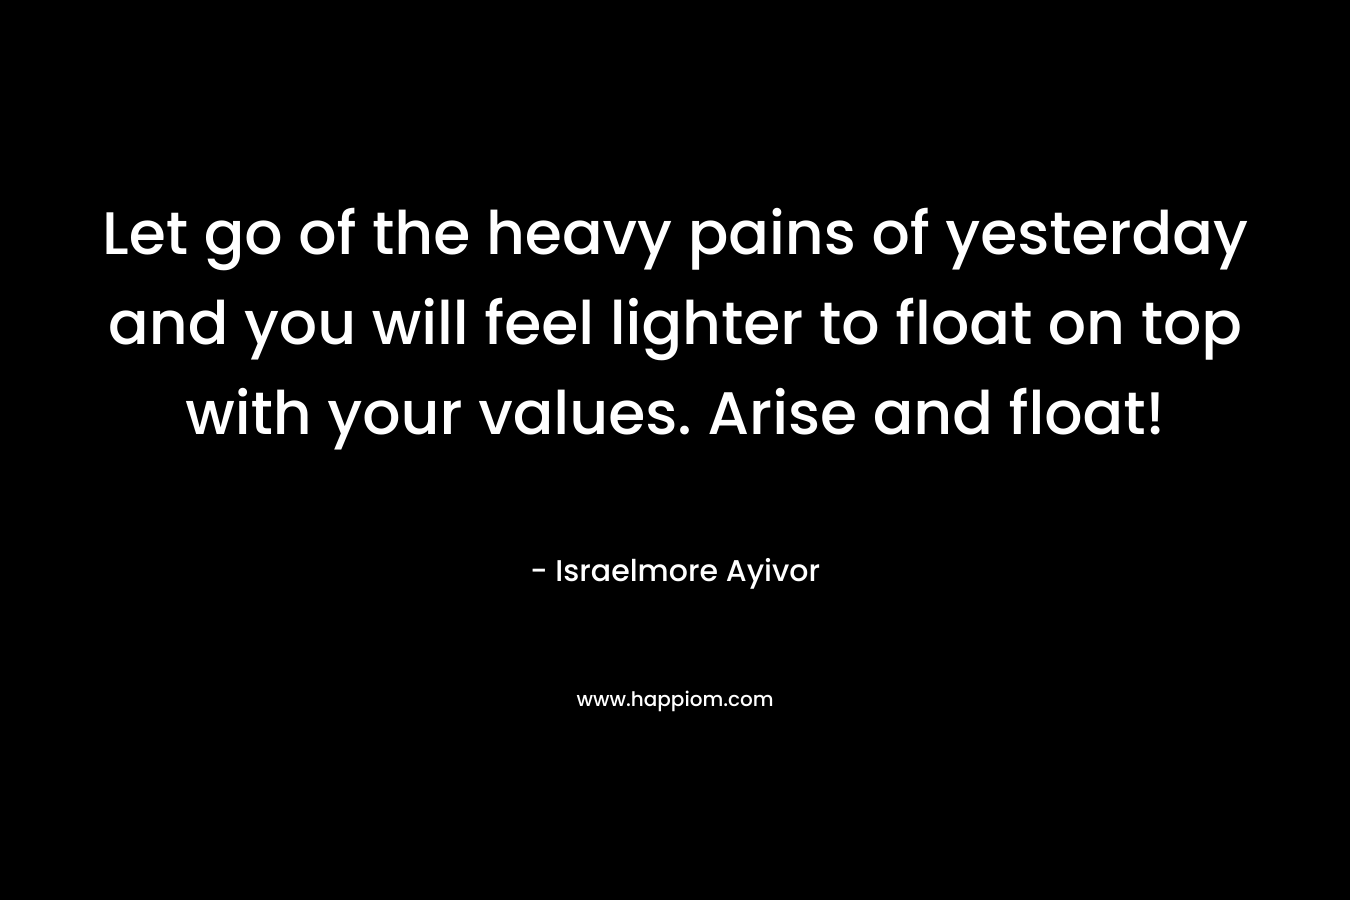 Let go of the heavy pains of yesterday and you will feel lighter to float on top with your values. Arise and float!